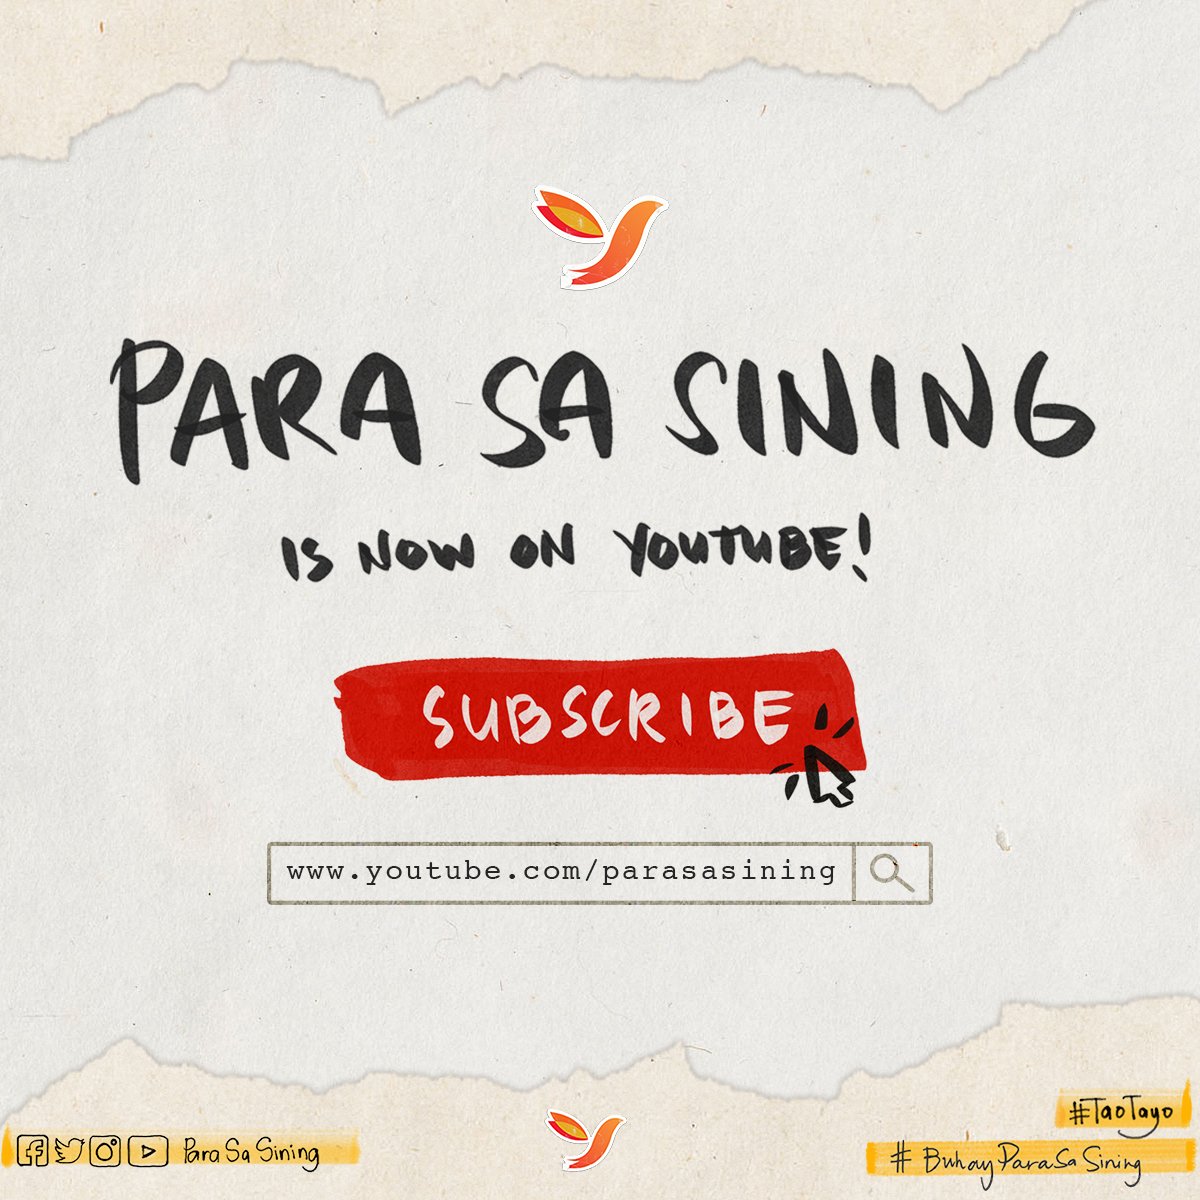 Missing the energy of the community ☀️

In the mean time, let us rewind and enjoy collaborative arts online. ⏮

youtube.com/parasasining

Subscribe to Para Sa Sining's Youtube channel for more creative content. 😊

#HomeNotAlone #TaoTayo #ParaSaSining #ArtAtHome